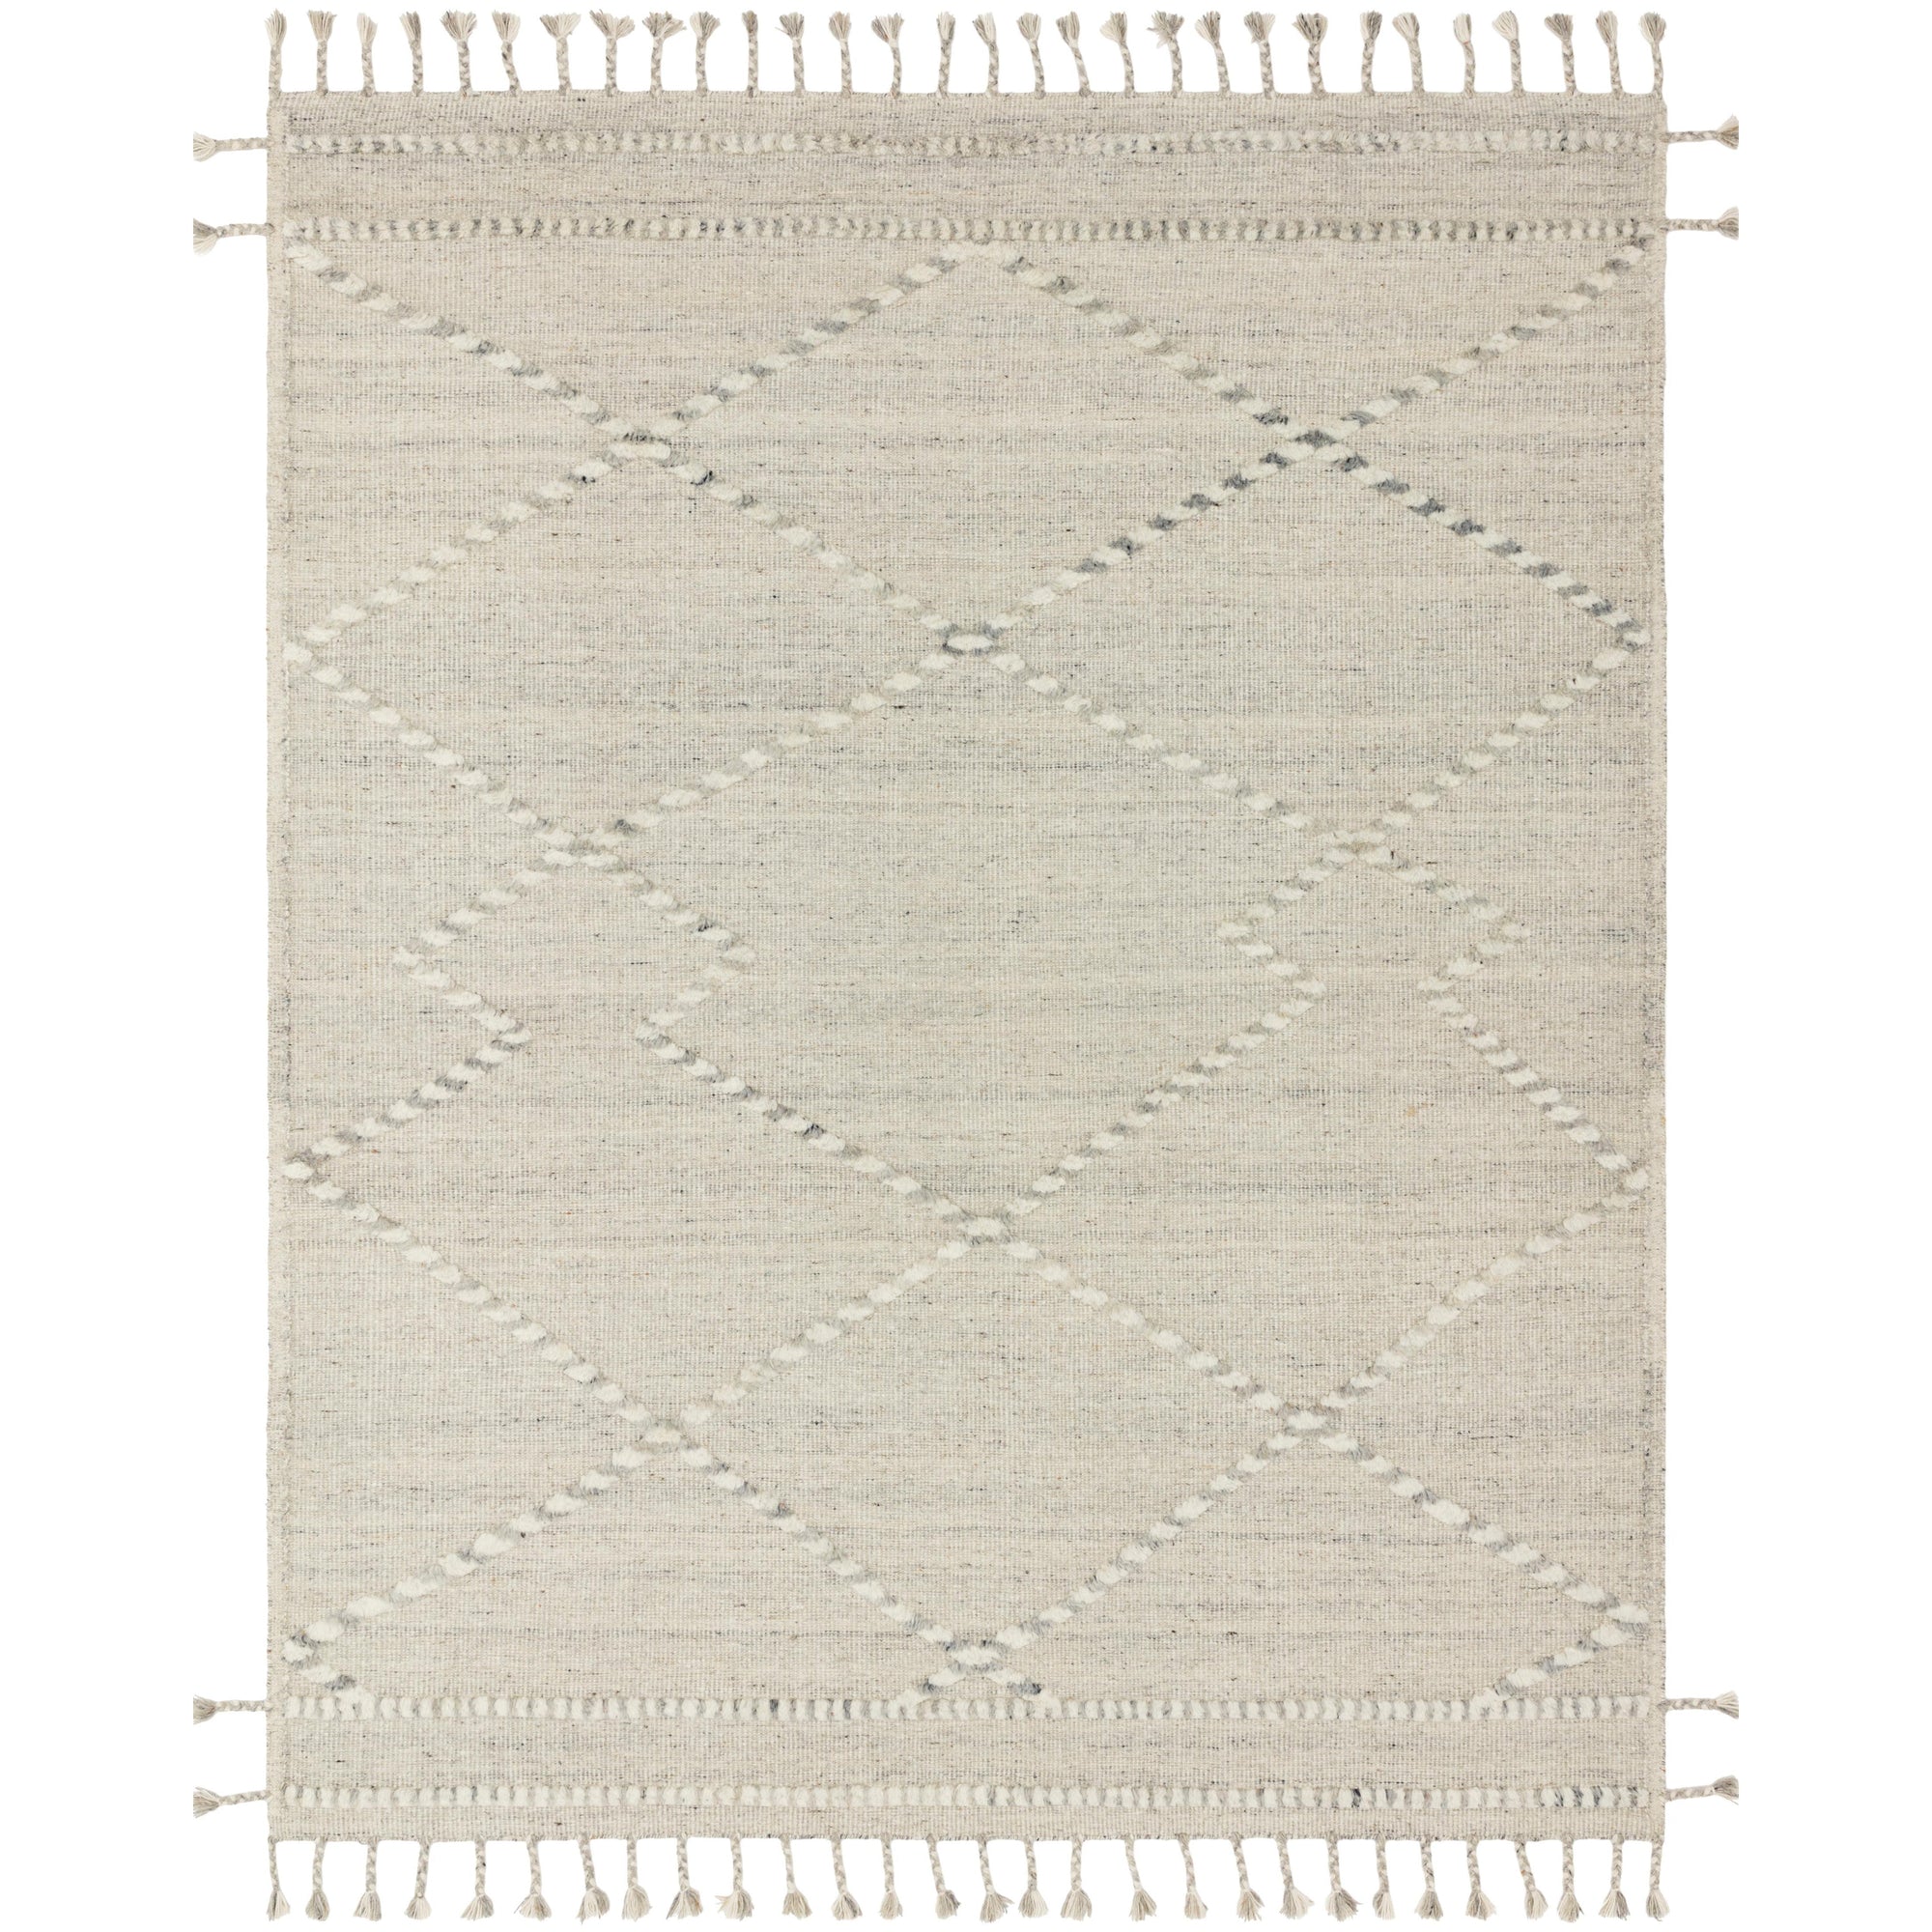 Rugs by Roo Loloi Iman Ivory Lt. Grey Area Rug in size 18" x 18" Sample